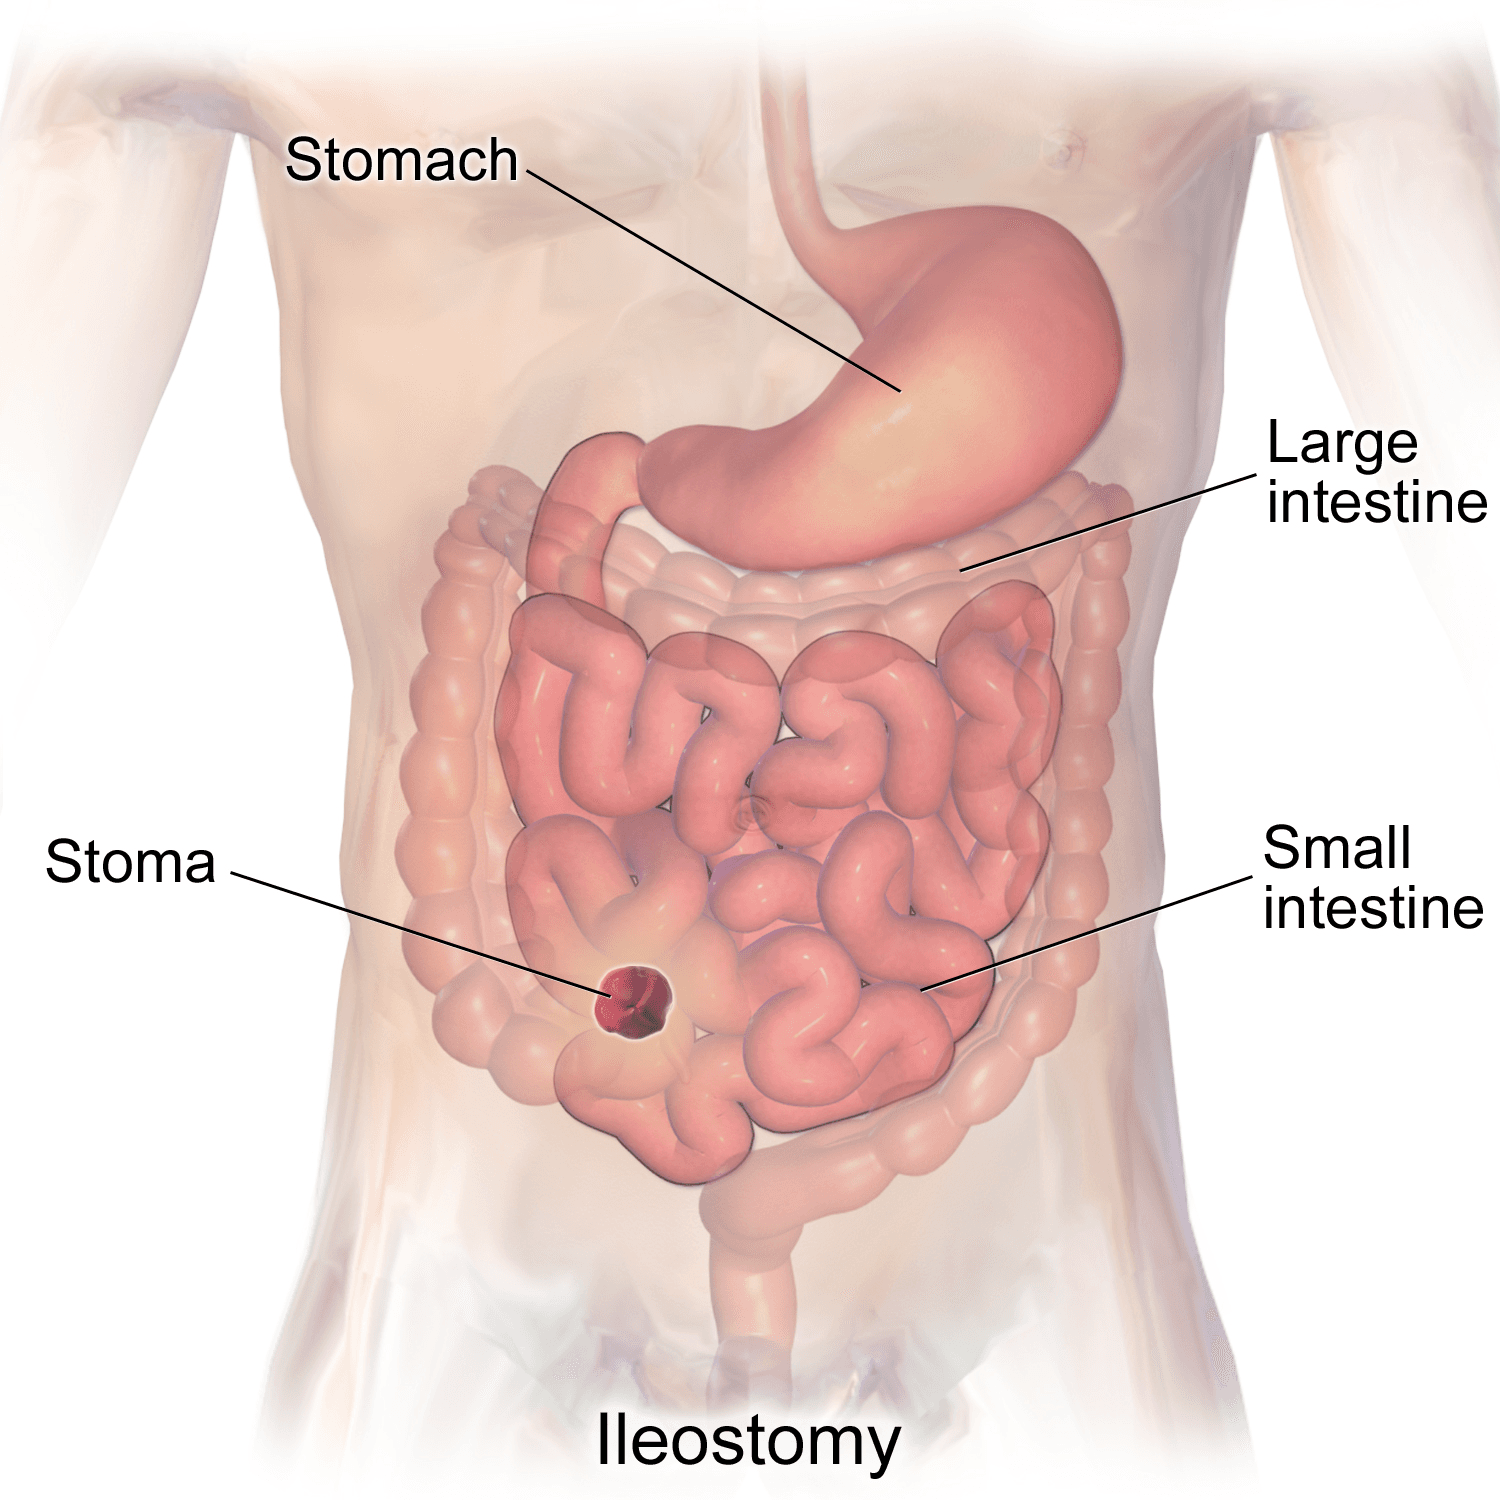 Article on Ileostomy: Procedure, Recovery, and Risks